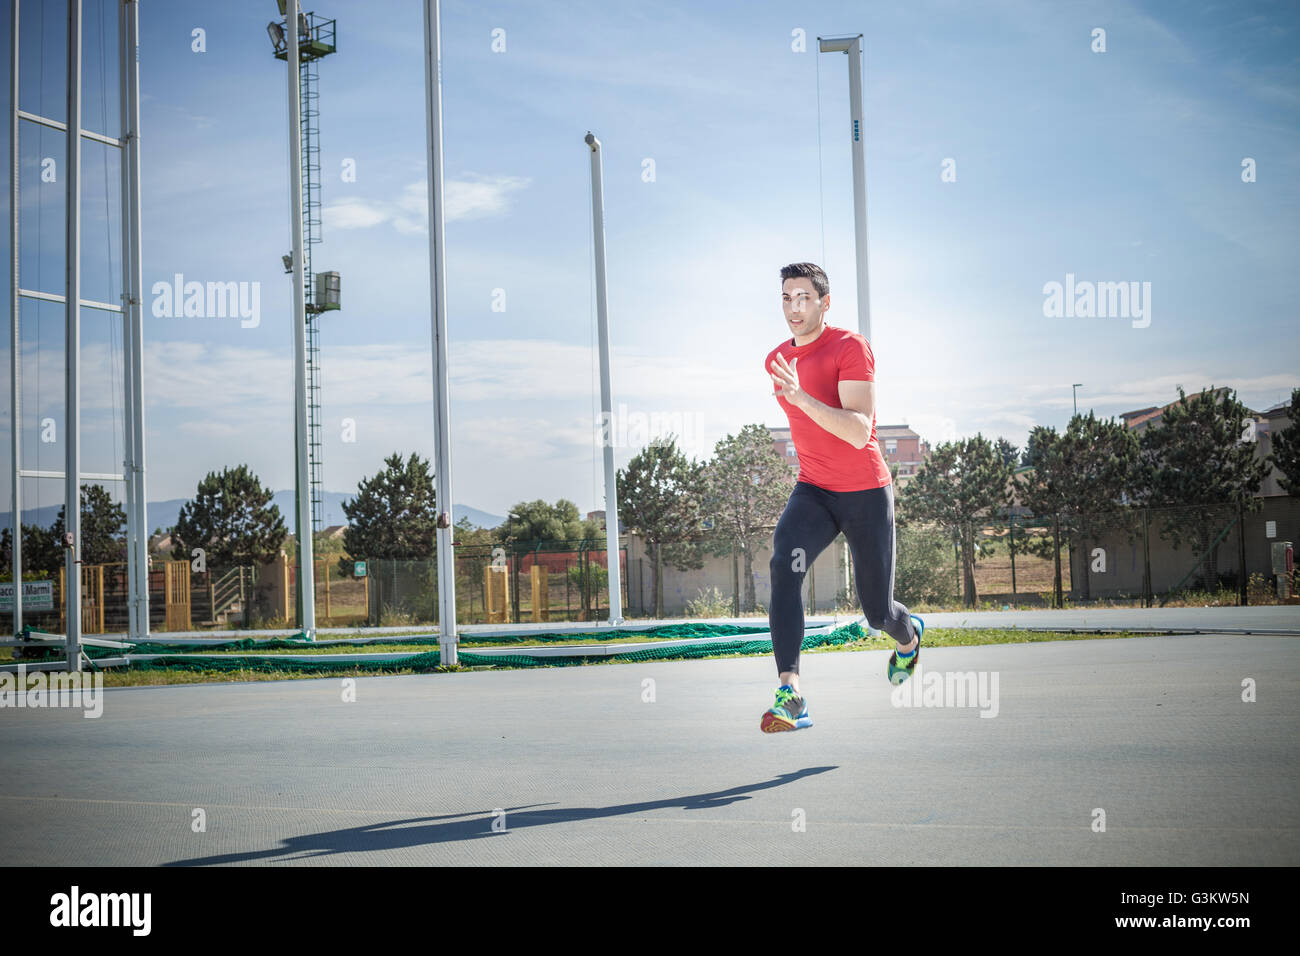 Young male sprinter sprinting at sport facility Stock Photo